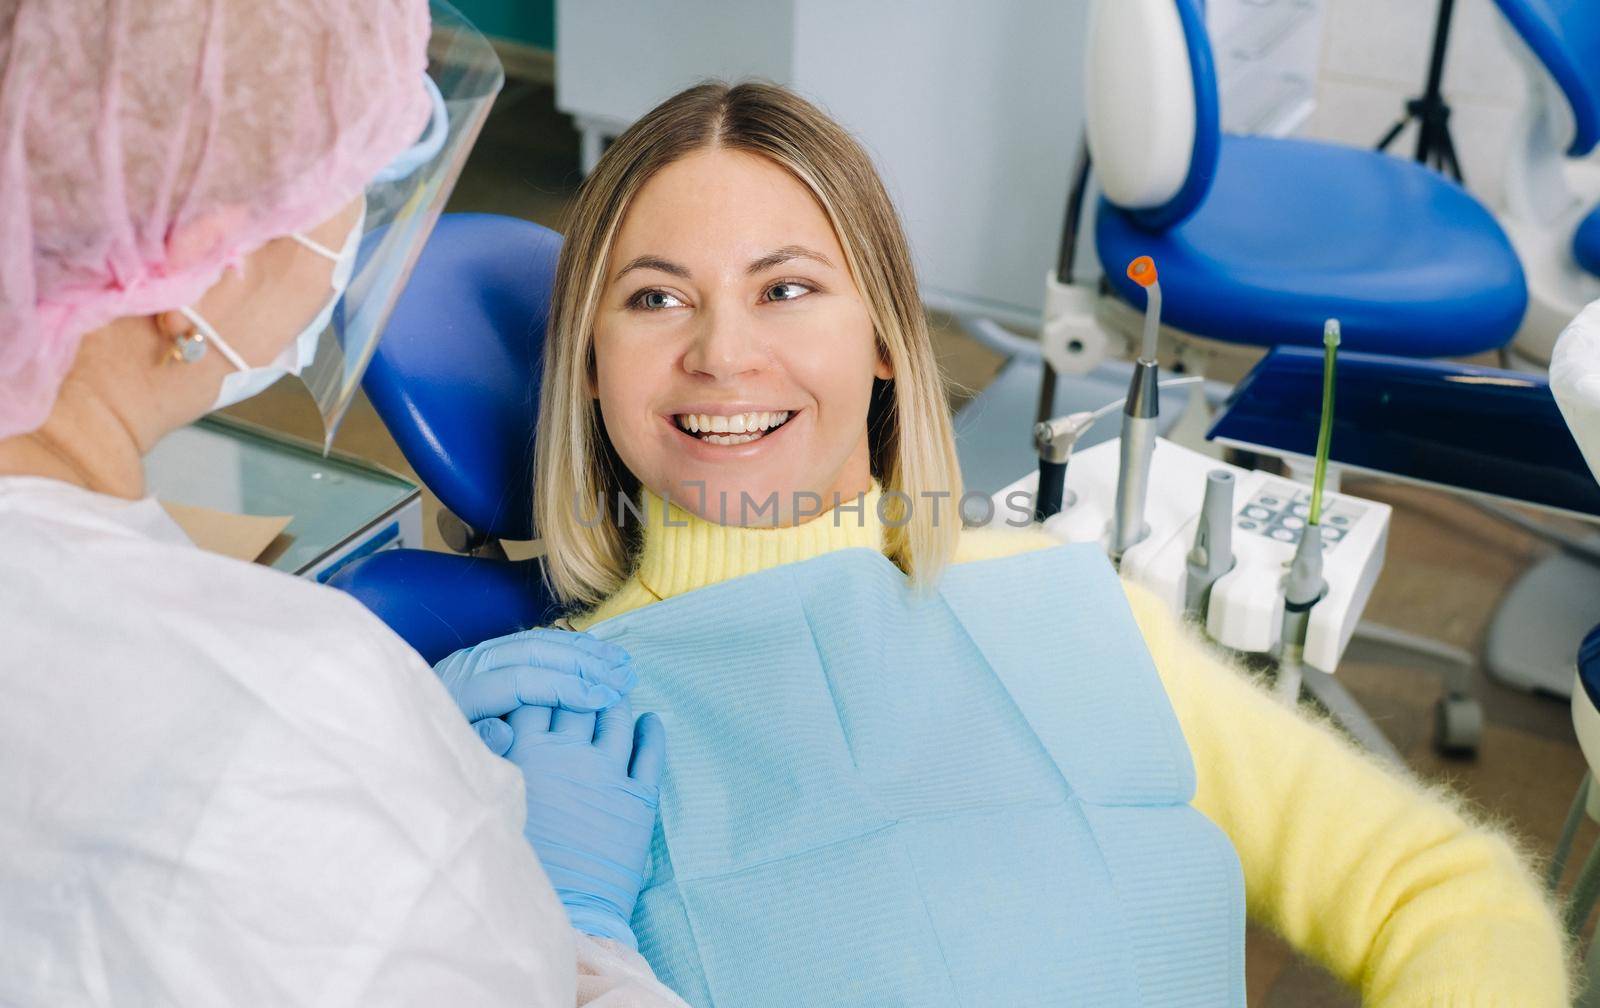 The girl smiles at the dentist and looks at her.